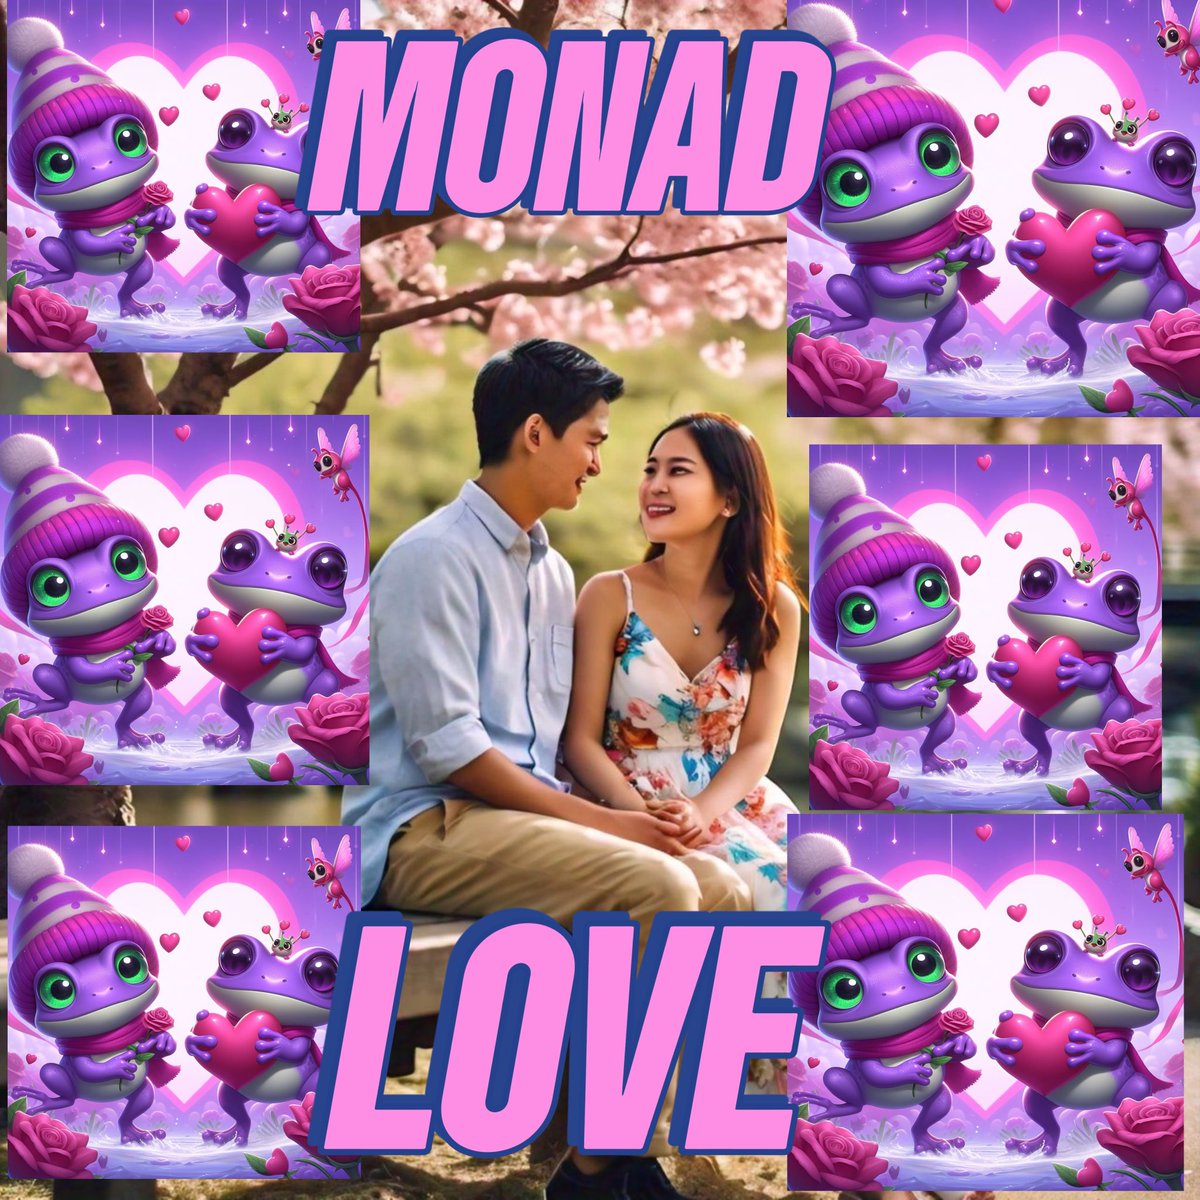 MONAD LOVE 💕 IS REAL